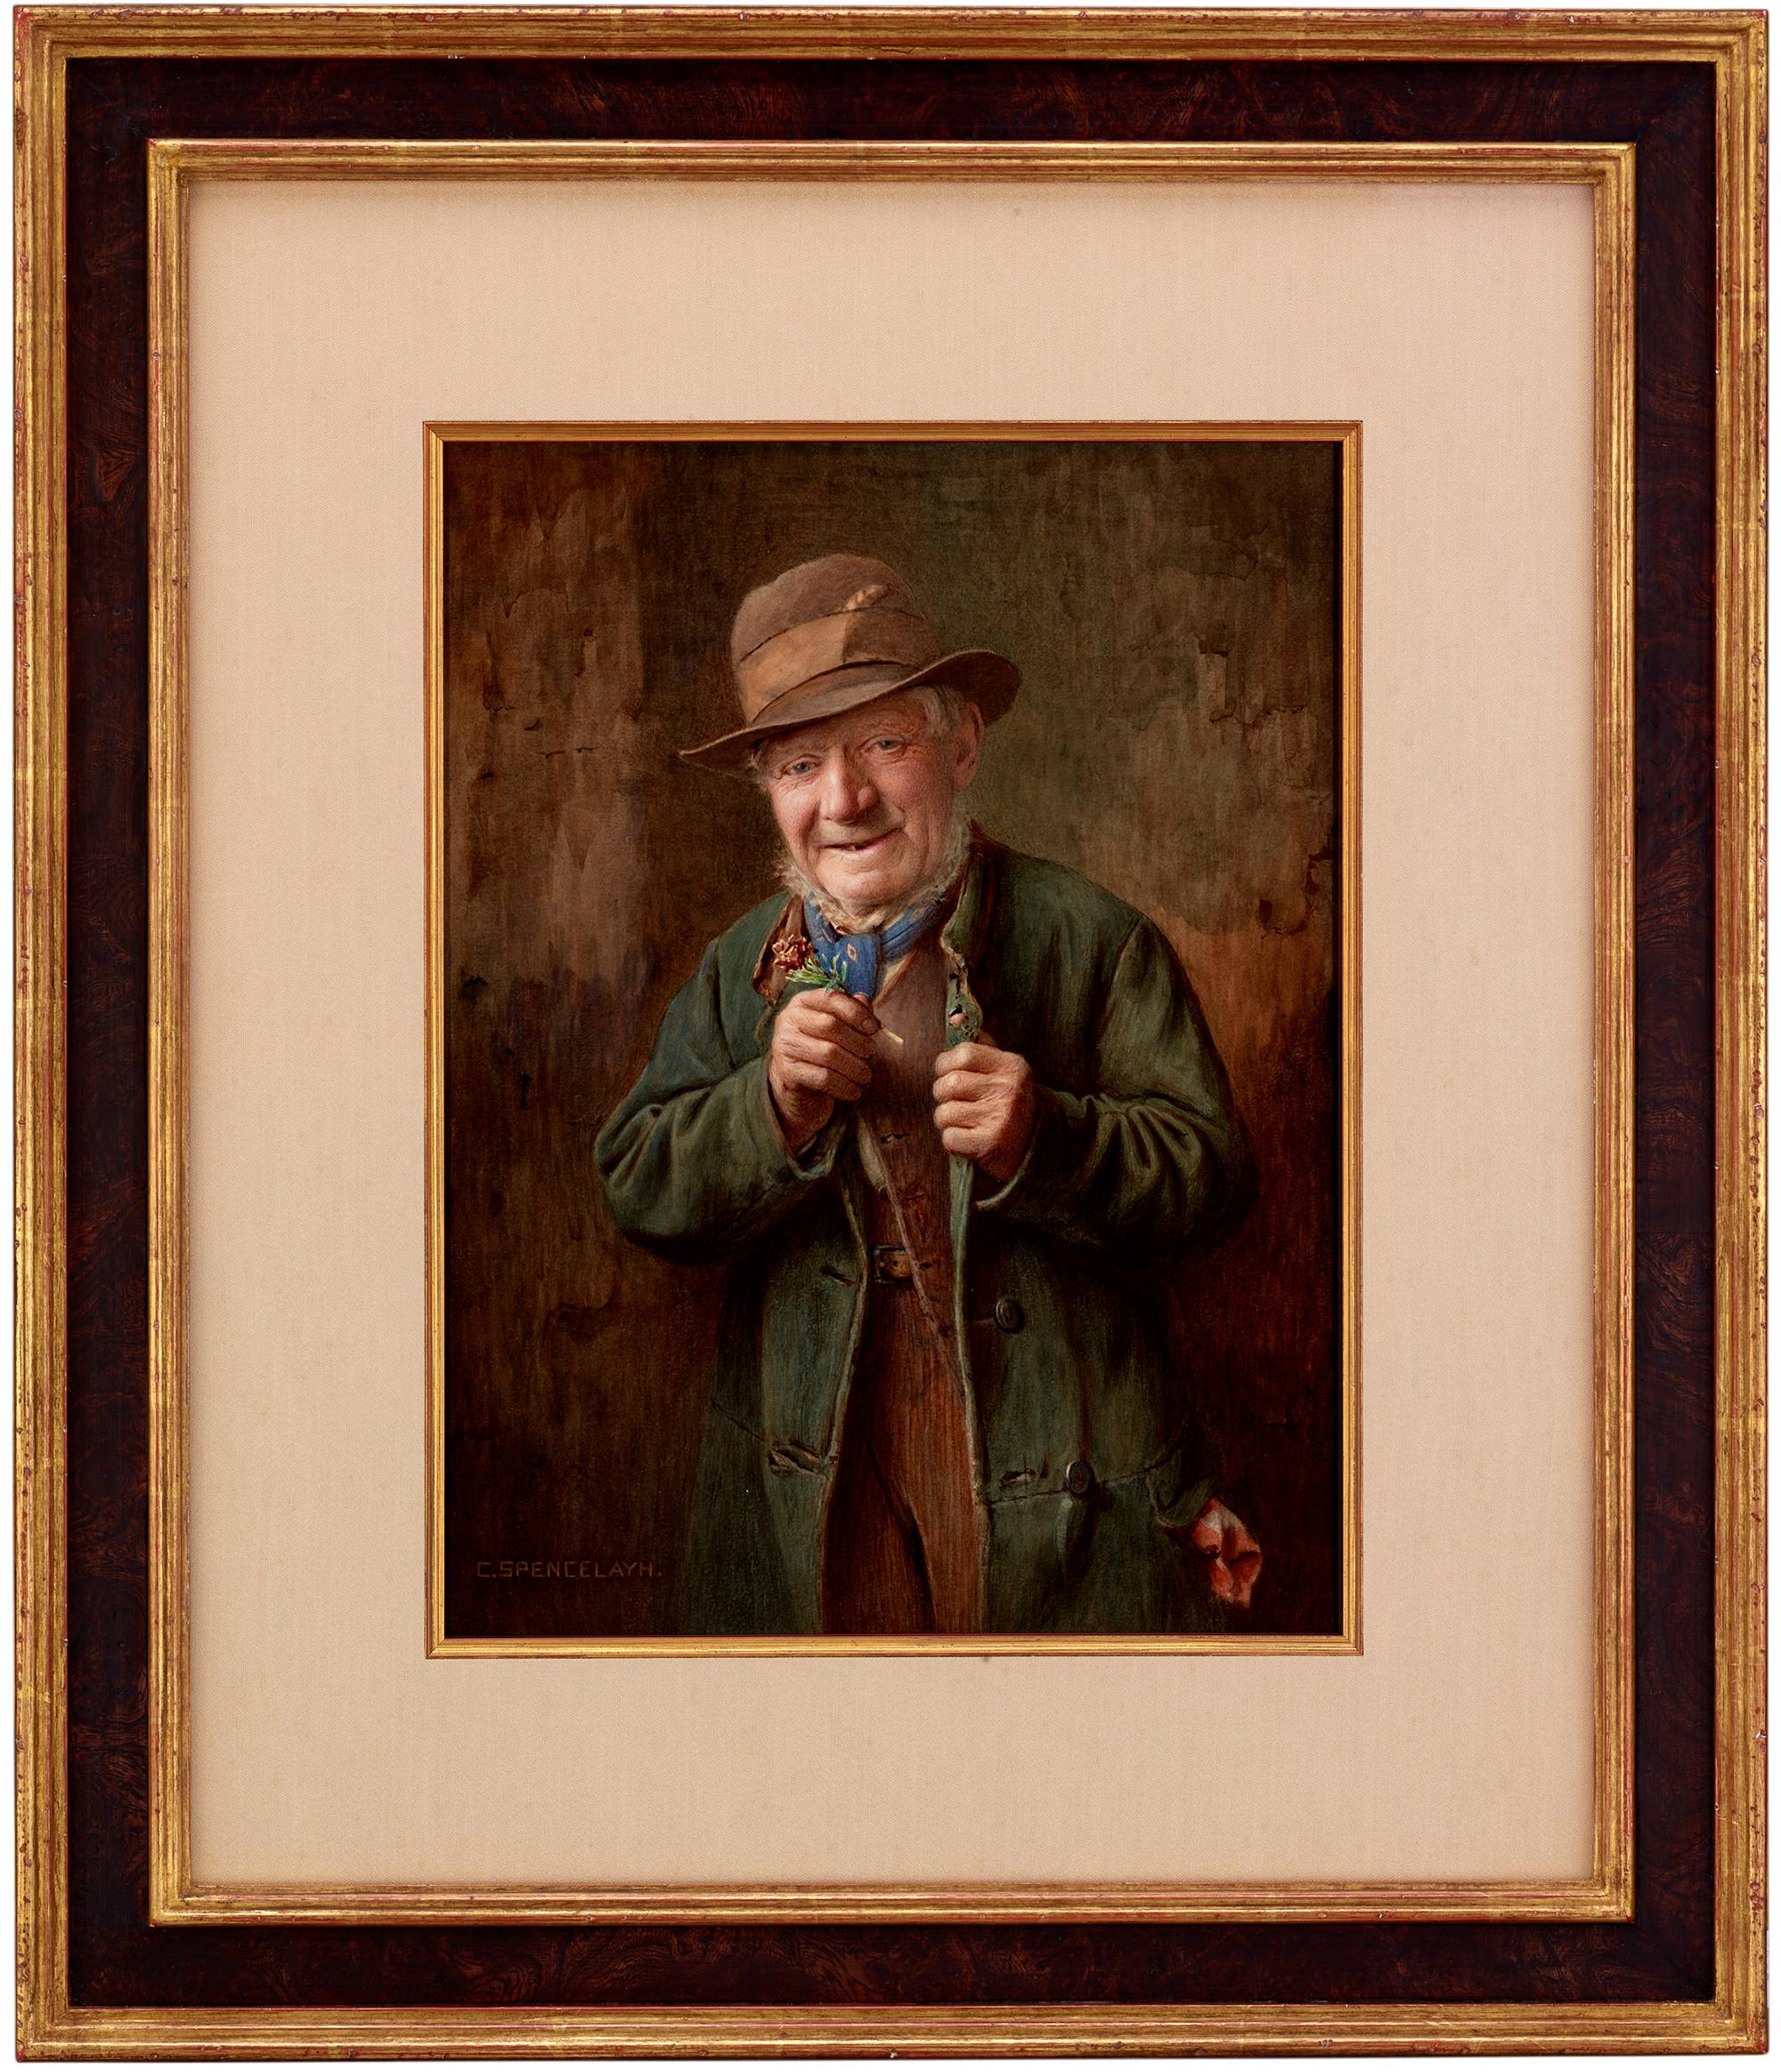 Charles Spencelayh
1865-1958  British

The Buttonhole

Signed “C.SPENCELAYH” (lower left) and inscribed “This Drawing was accepted into the Royal Academy but crowded out for want of space” (en verso)
  Watercolor and pencil with gum arabic on